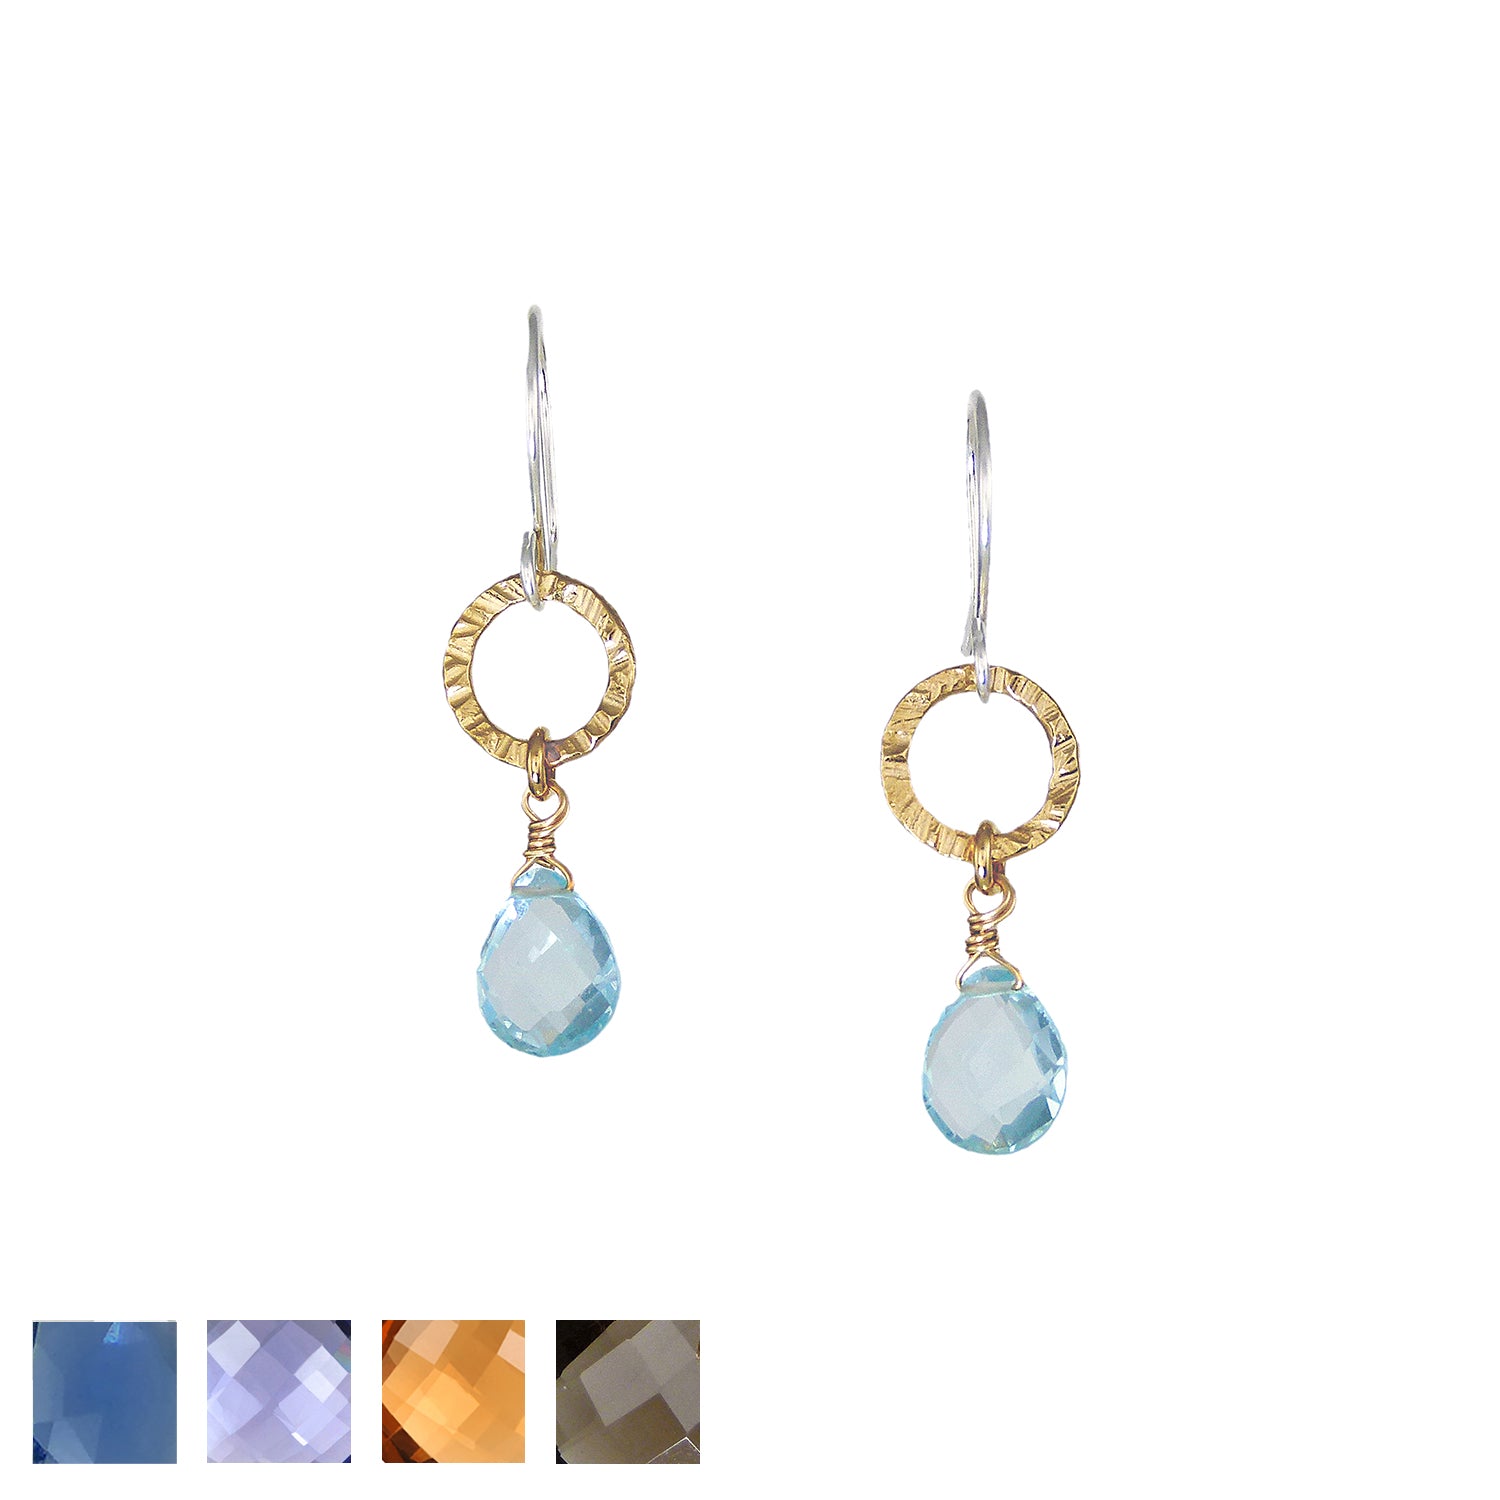 Tiny Hammered Earrings - Gold